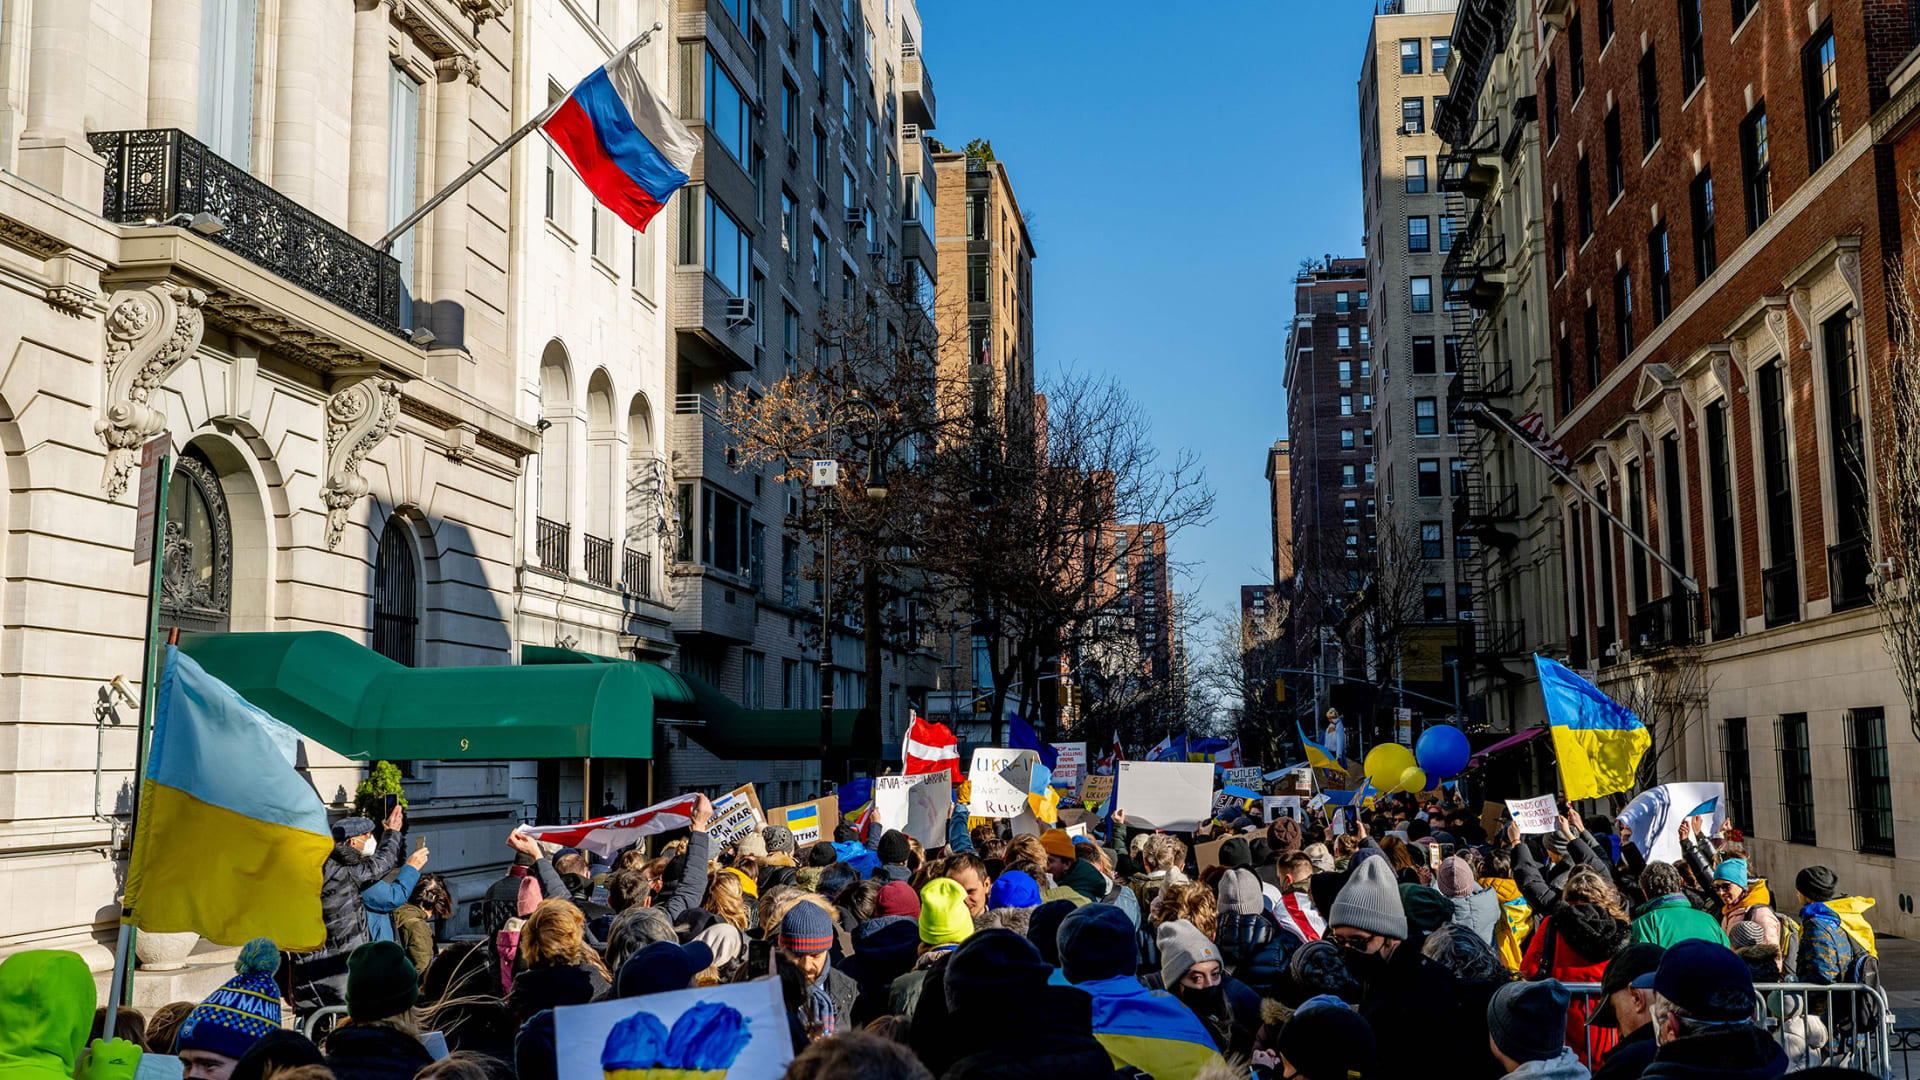 Protesters gather outside the Russian consulate in New York City during a Stand With Ukraine rally on February 27, 2022.